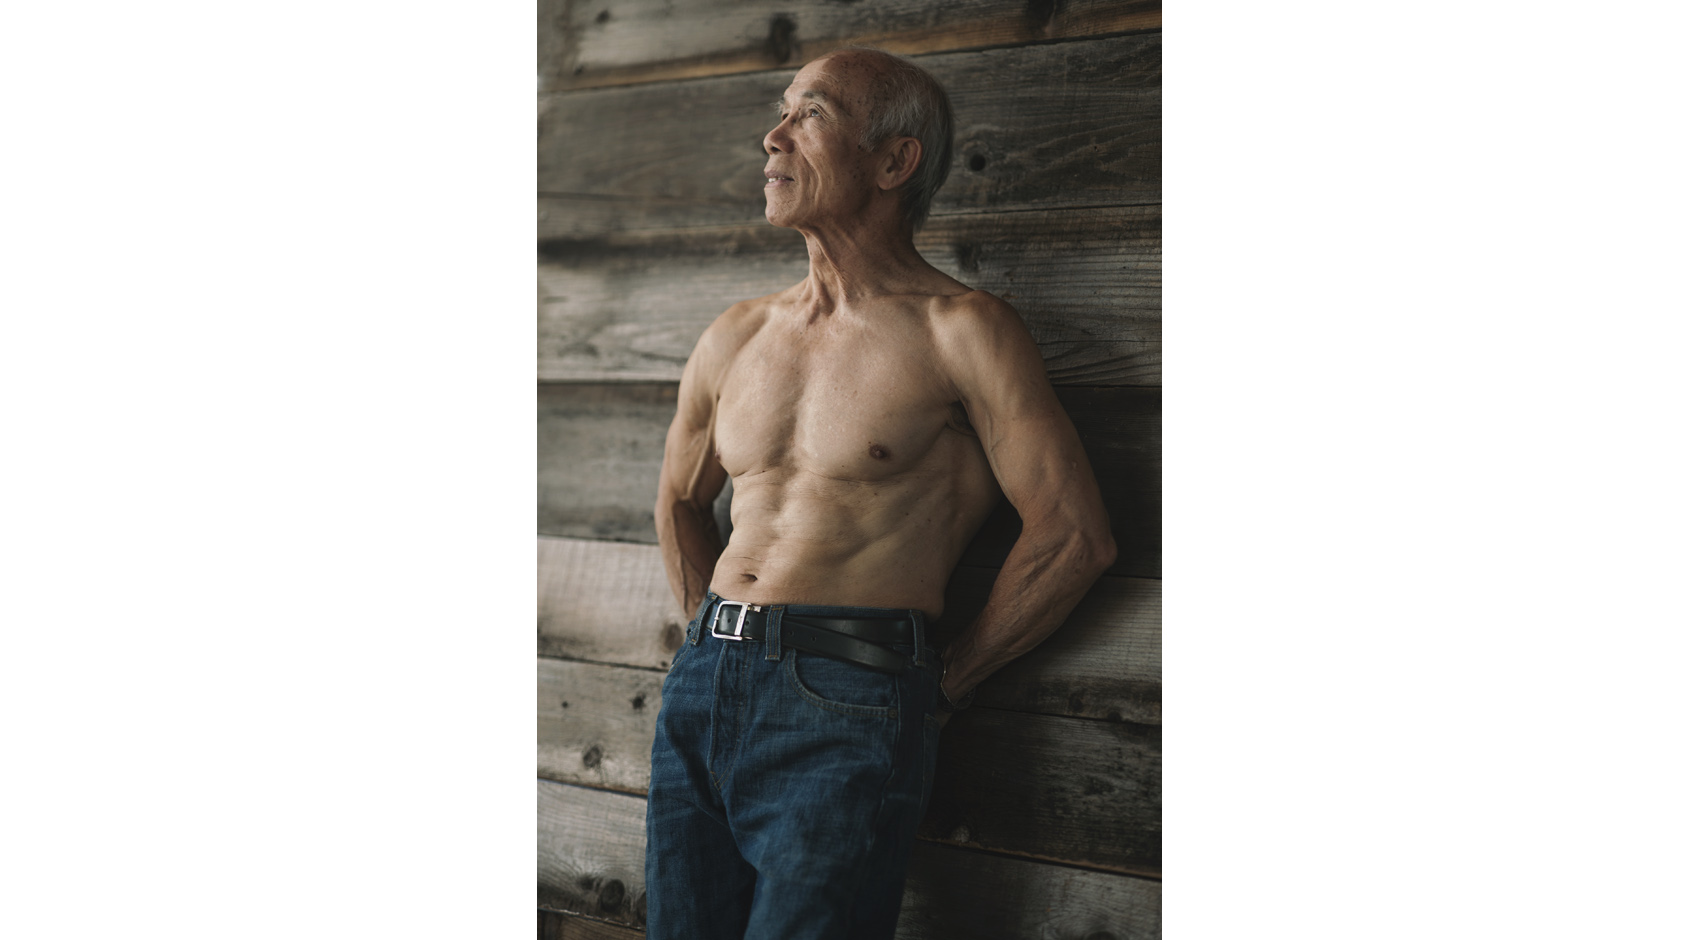 Men Over 50 - Thanh